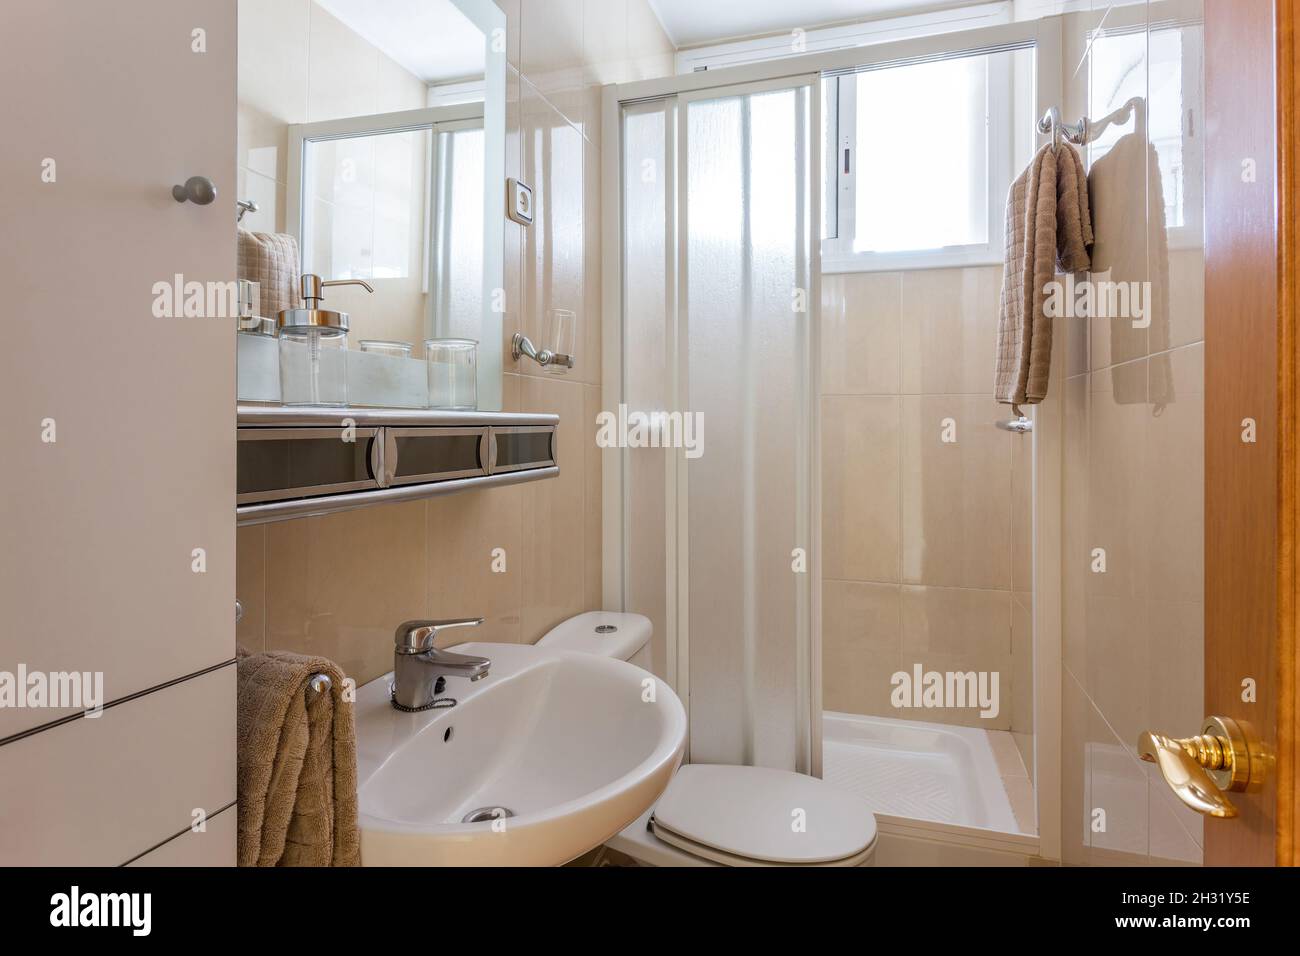 Simple style interior of small restroom with beige ceramic tile walls, white sink, classic WC toilet and shower cabin. Stock Photo